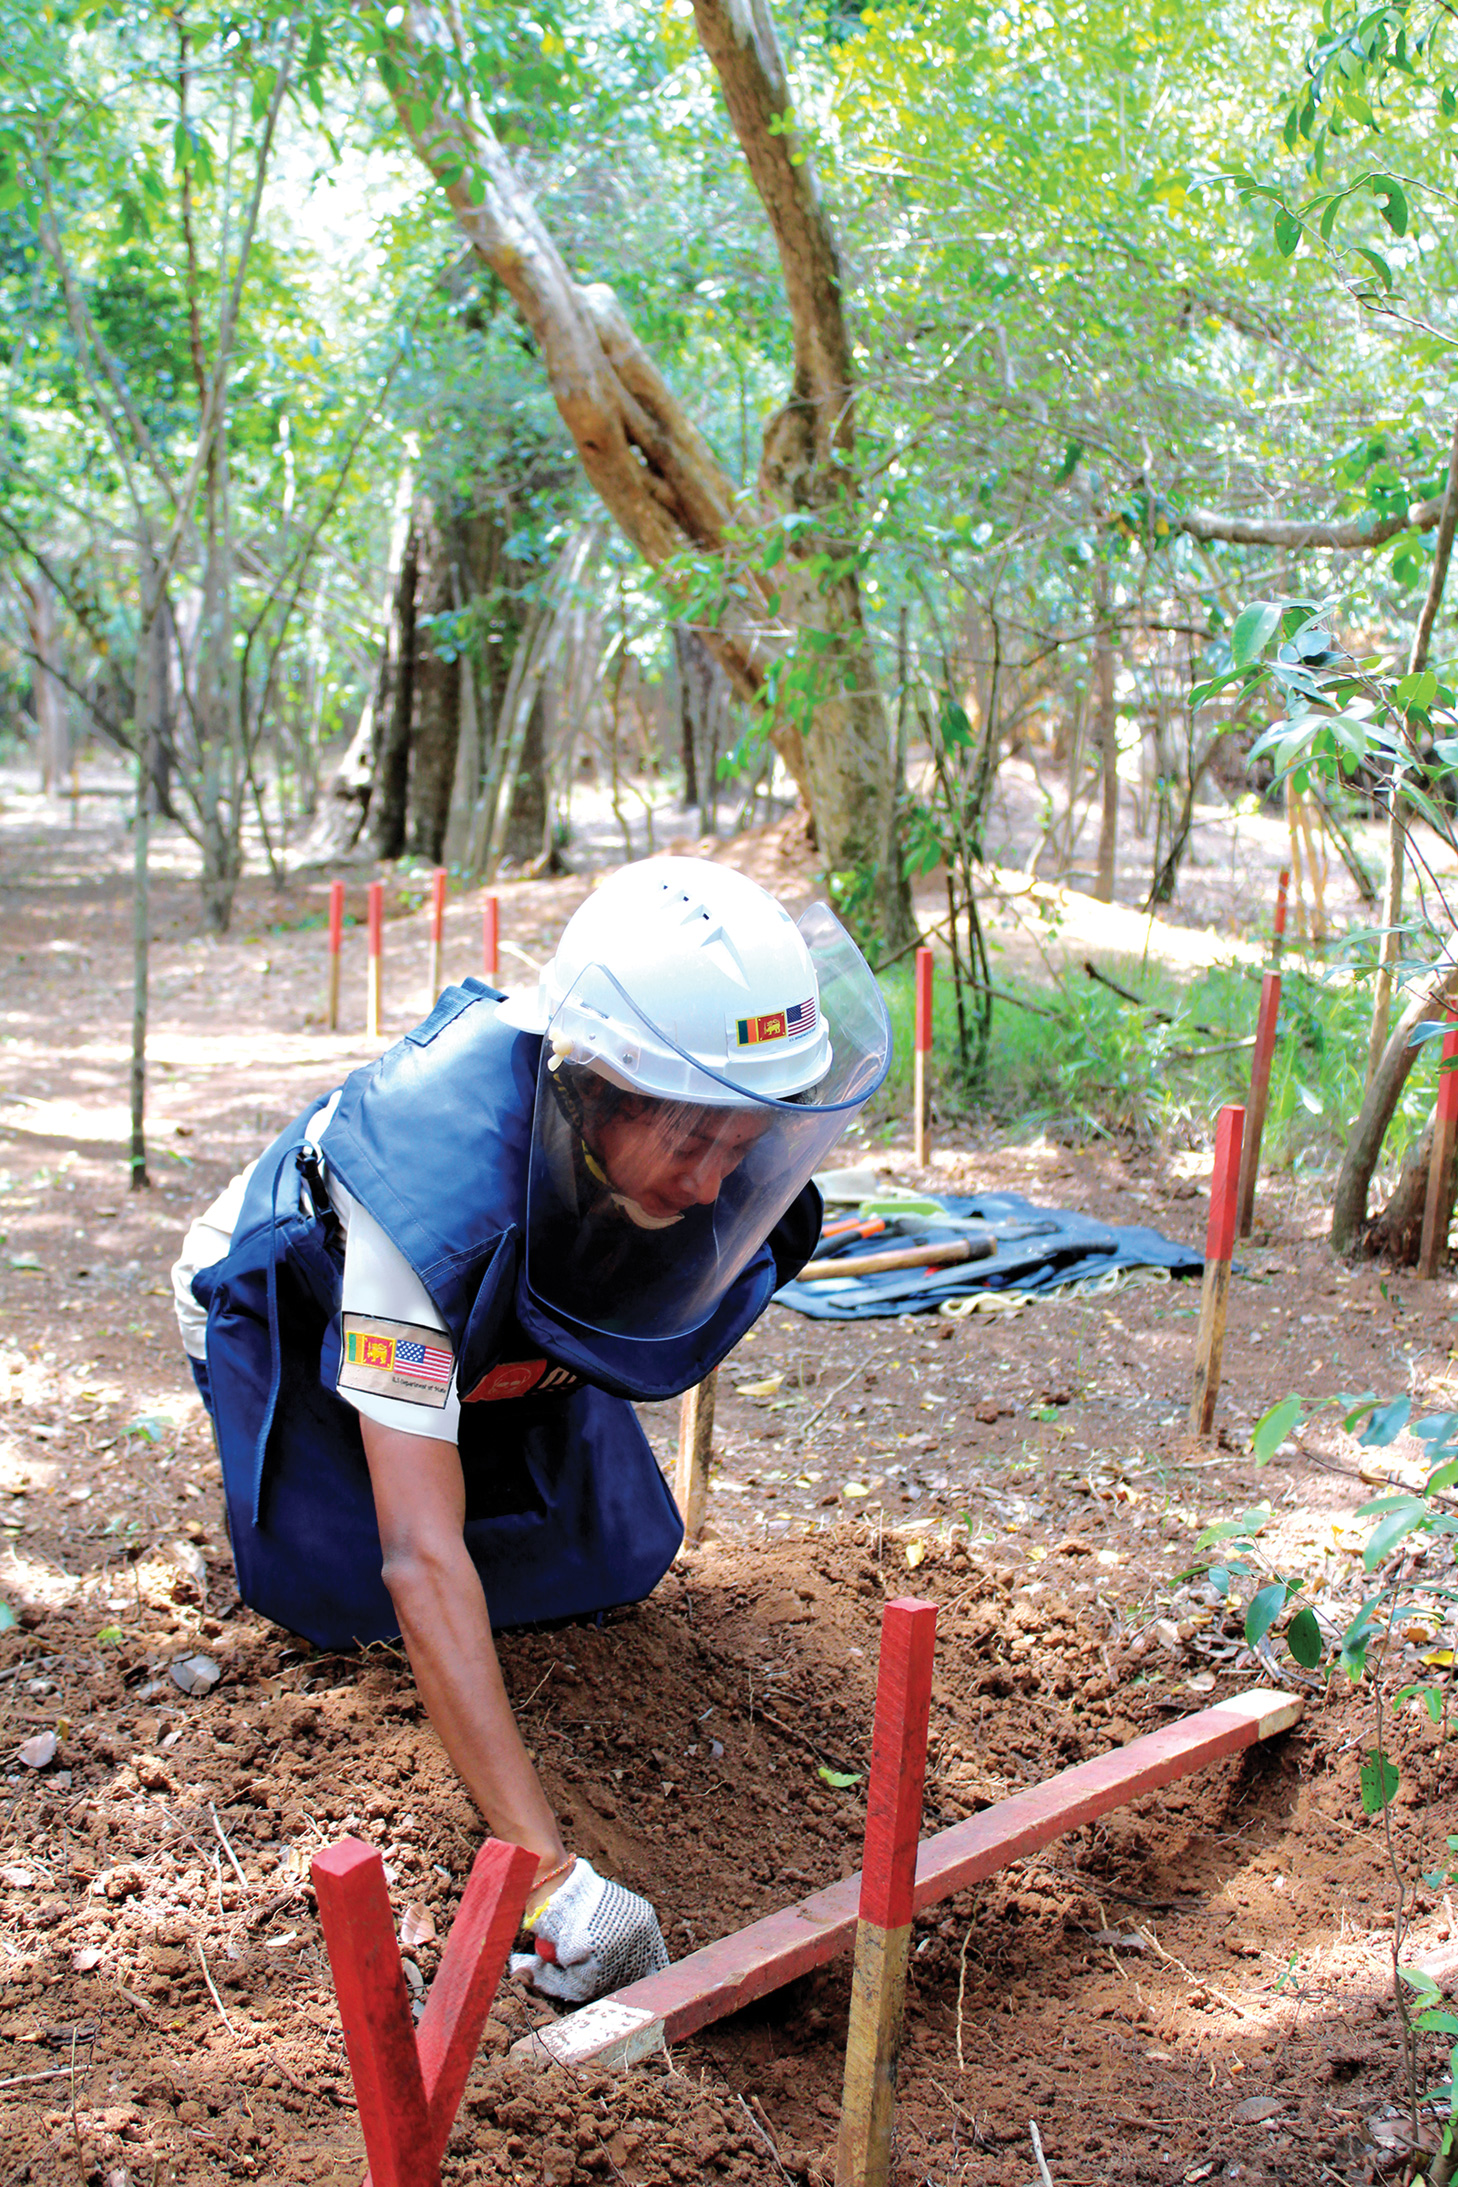 A kneeling person in protective gear with a tool in her hand digging in the dirt